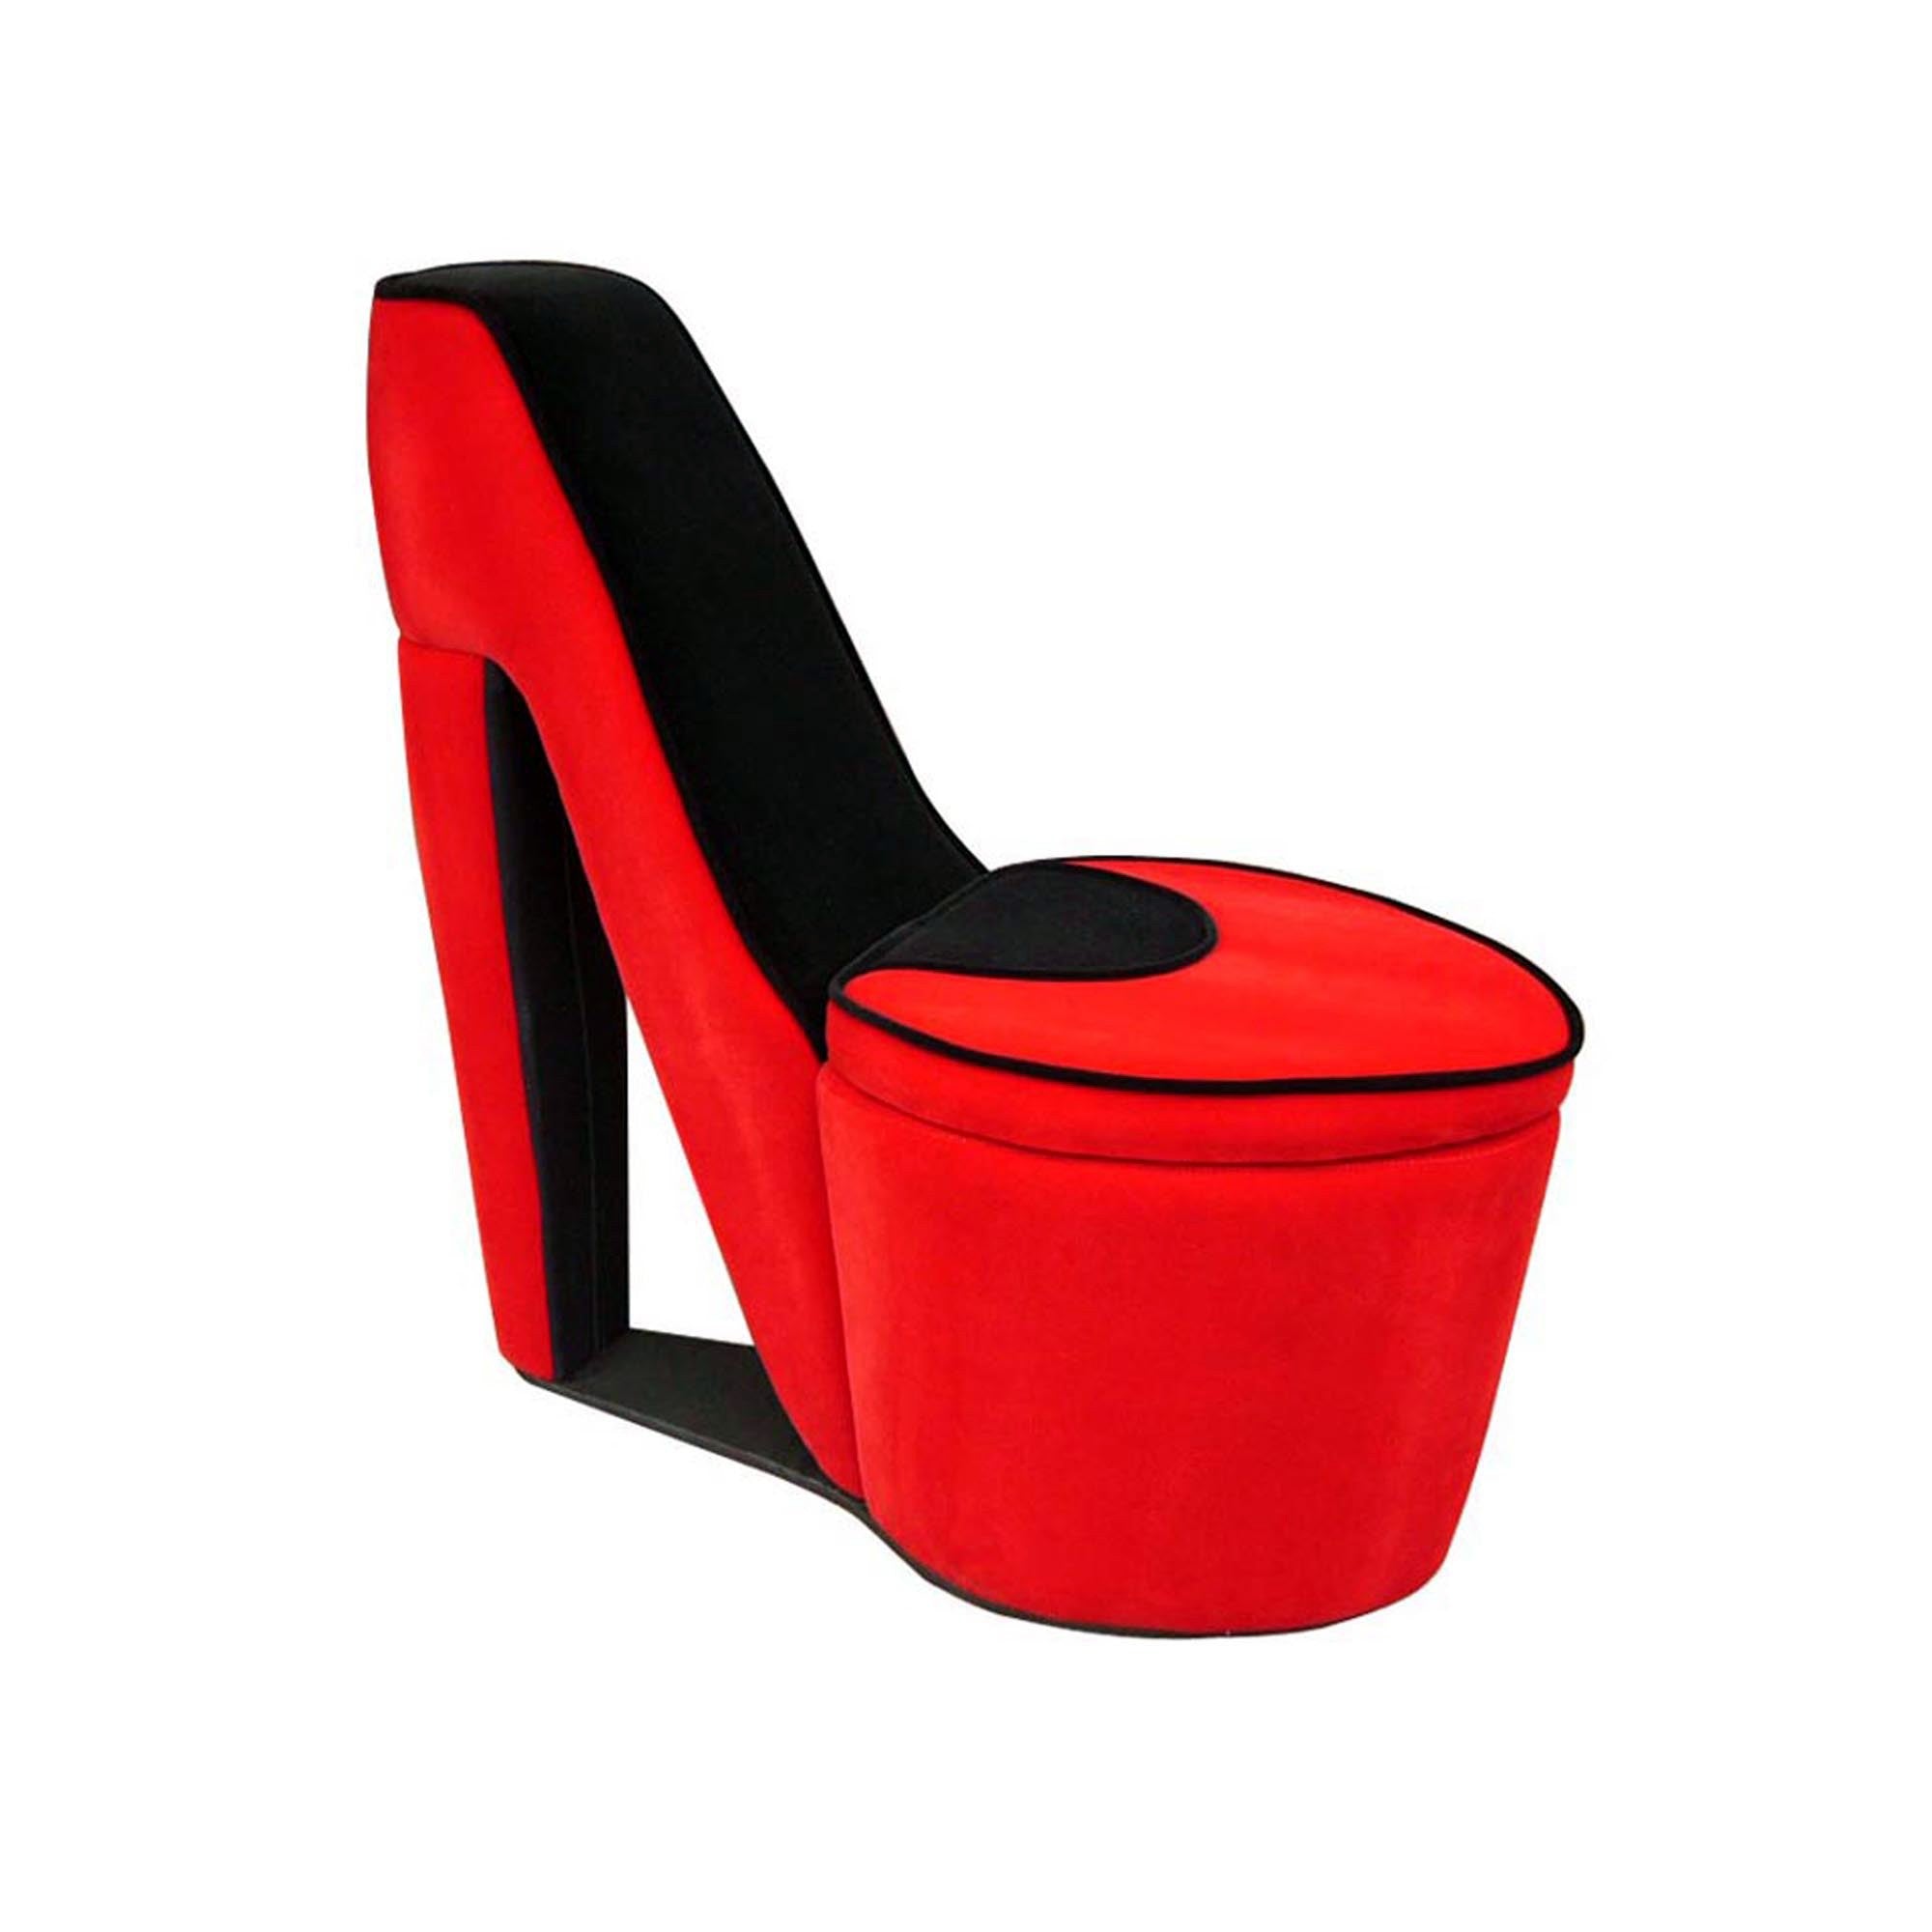 32" Red Faux Suede Side Chair